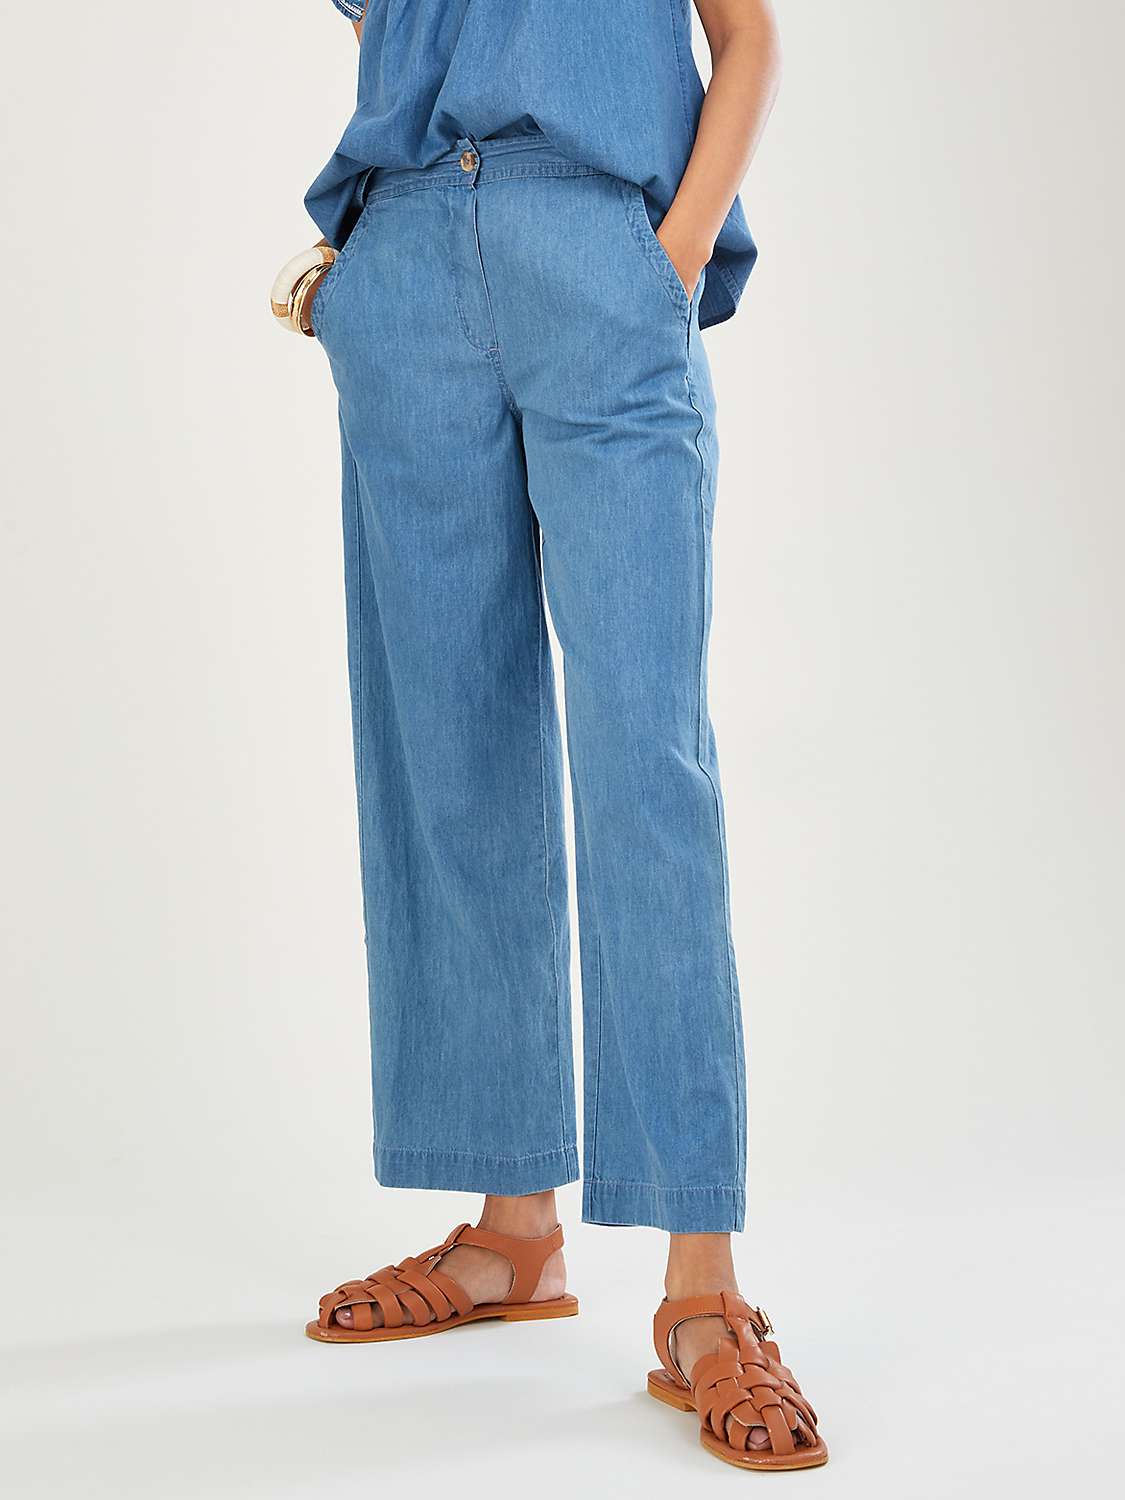 Monsoon Denim Pull On Cropped Trousers, Blue at John Lewis & Partners